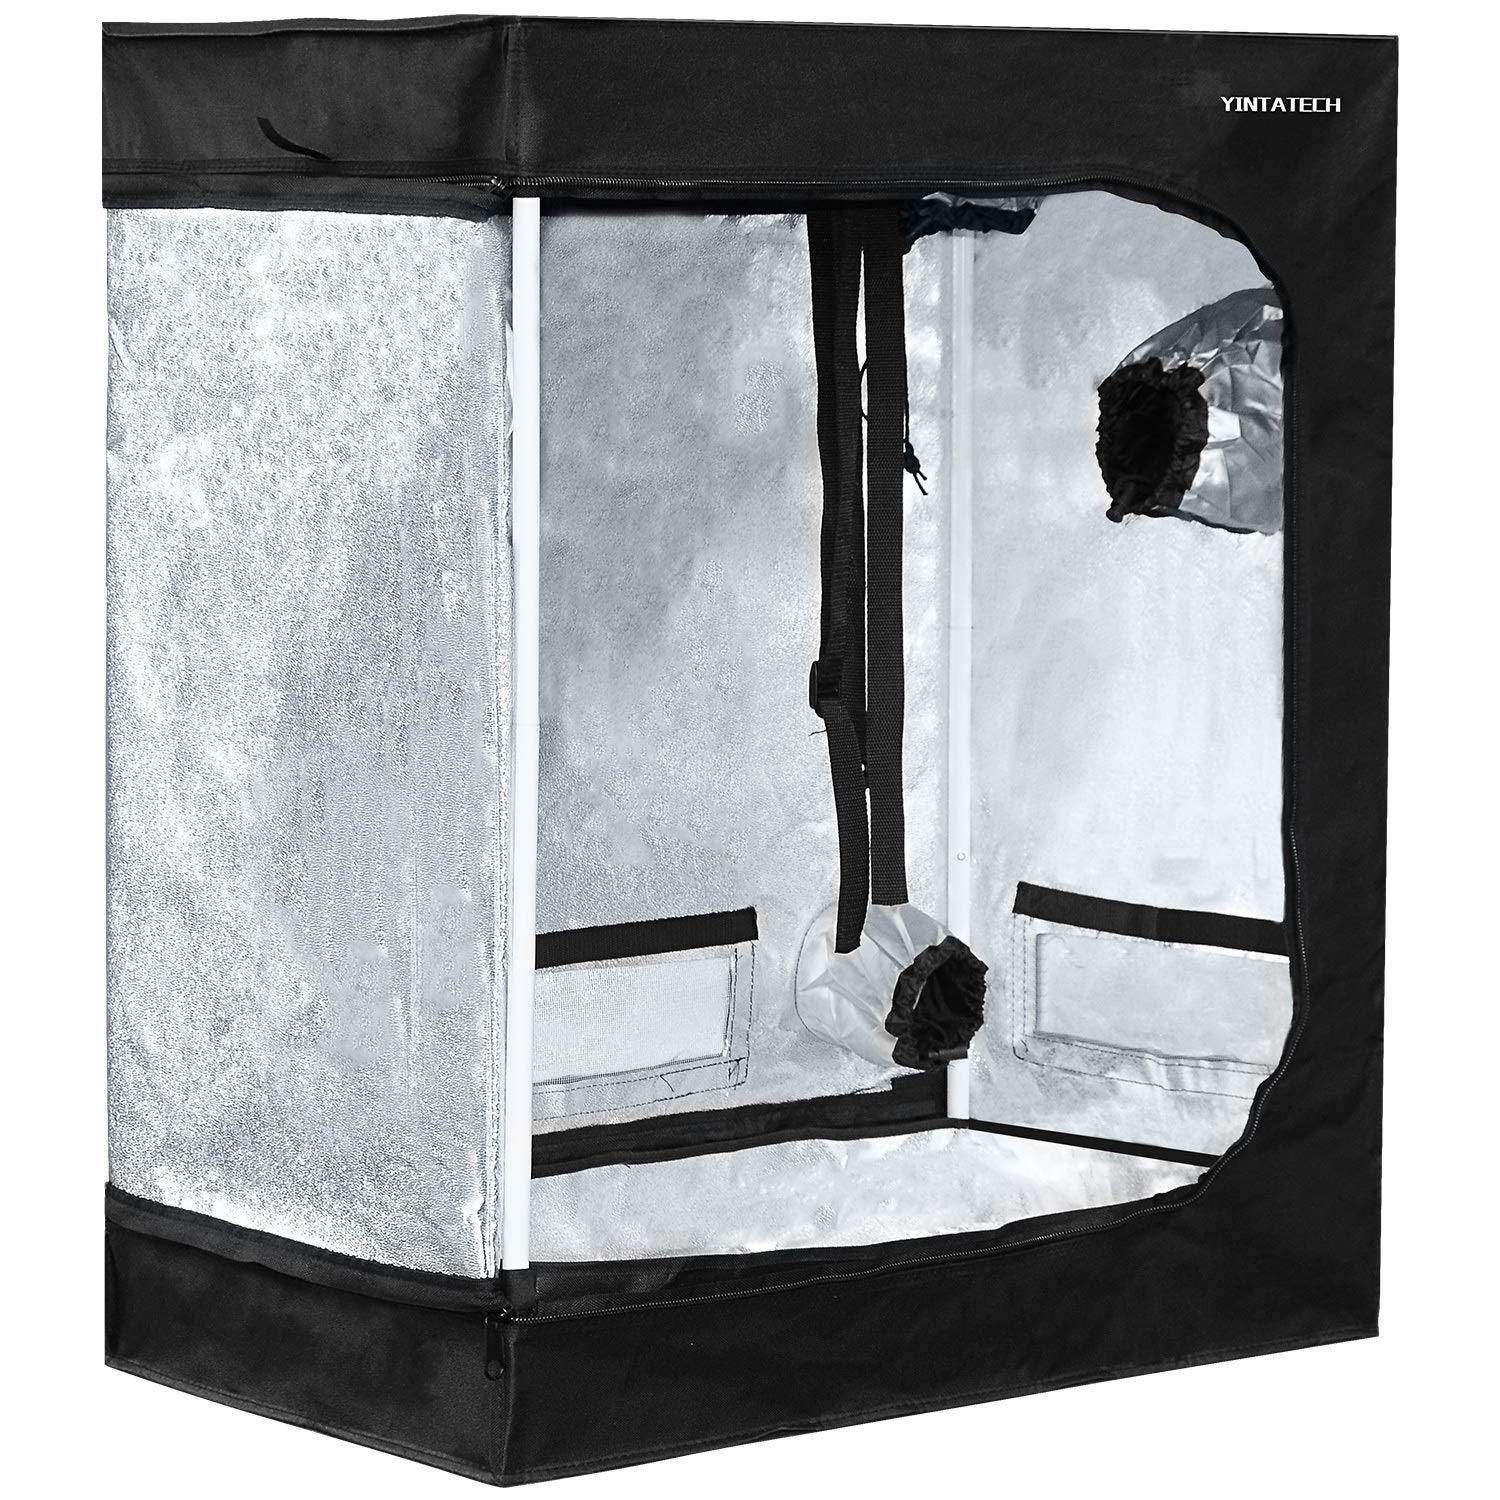 YINTATECH 30"x18"x36" Plant Grow Tent, Reflective Mylar 600D Oxford Fabric Growing Room, with Waterproof Floor Tray, for Indoor Gardening Hydroponic Plant Germination Growing